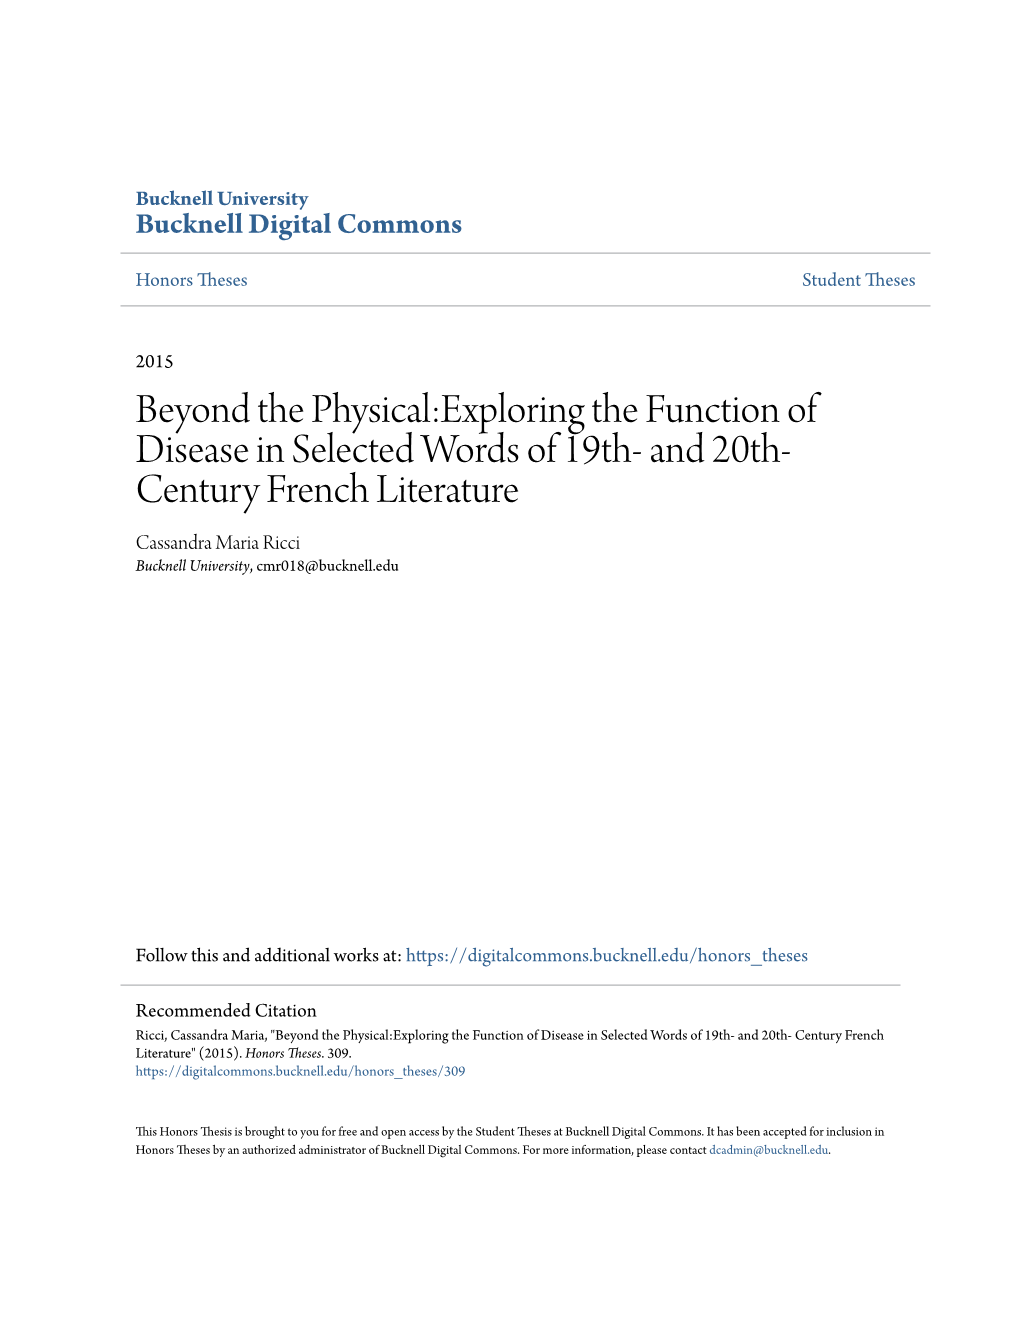 Beyond the Physical:Exploring the Function of Disease in Selected